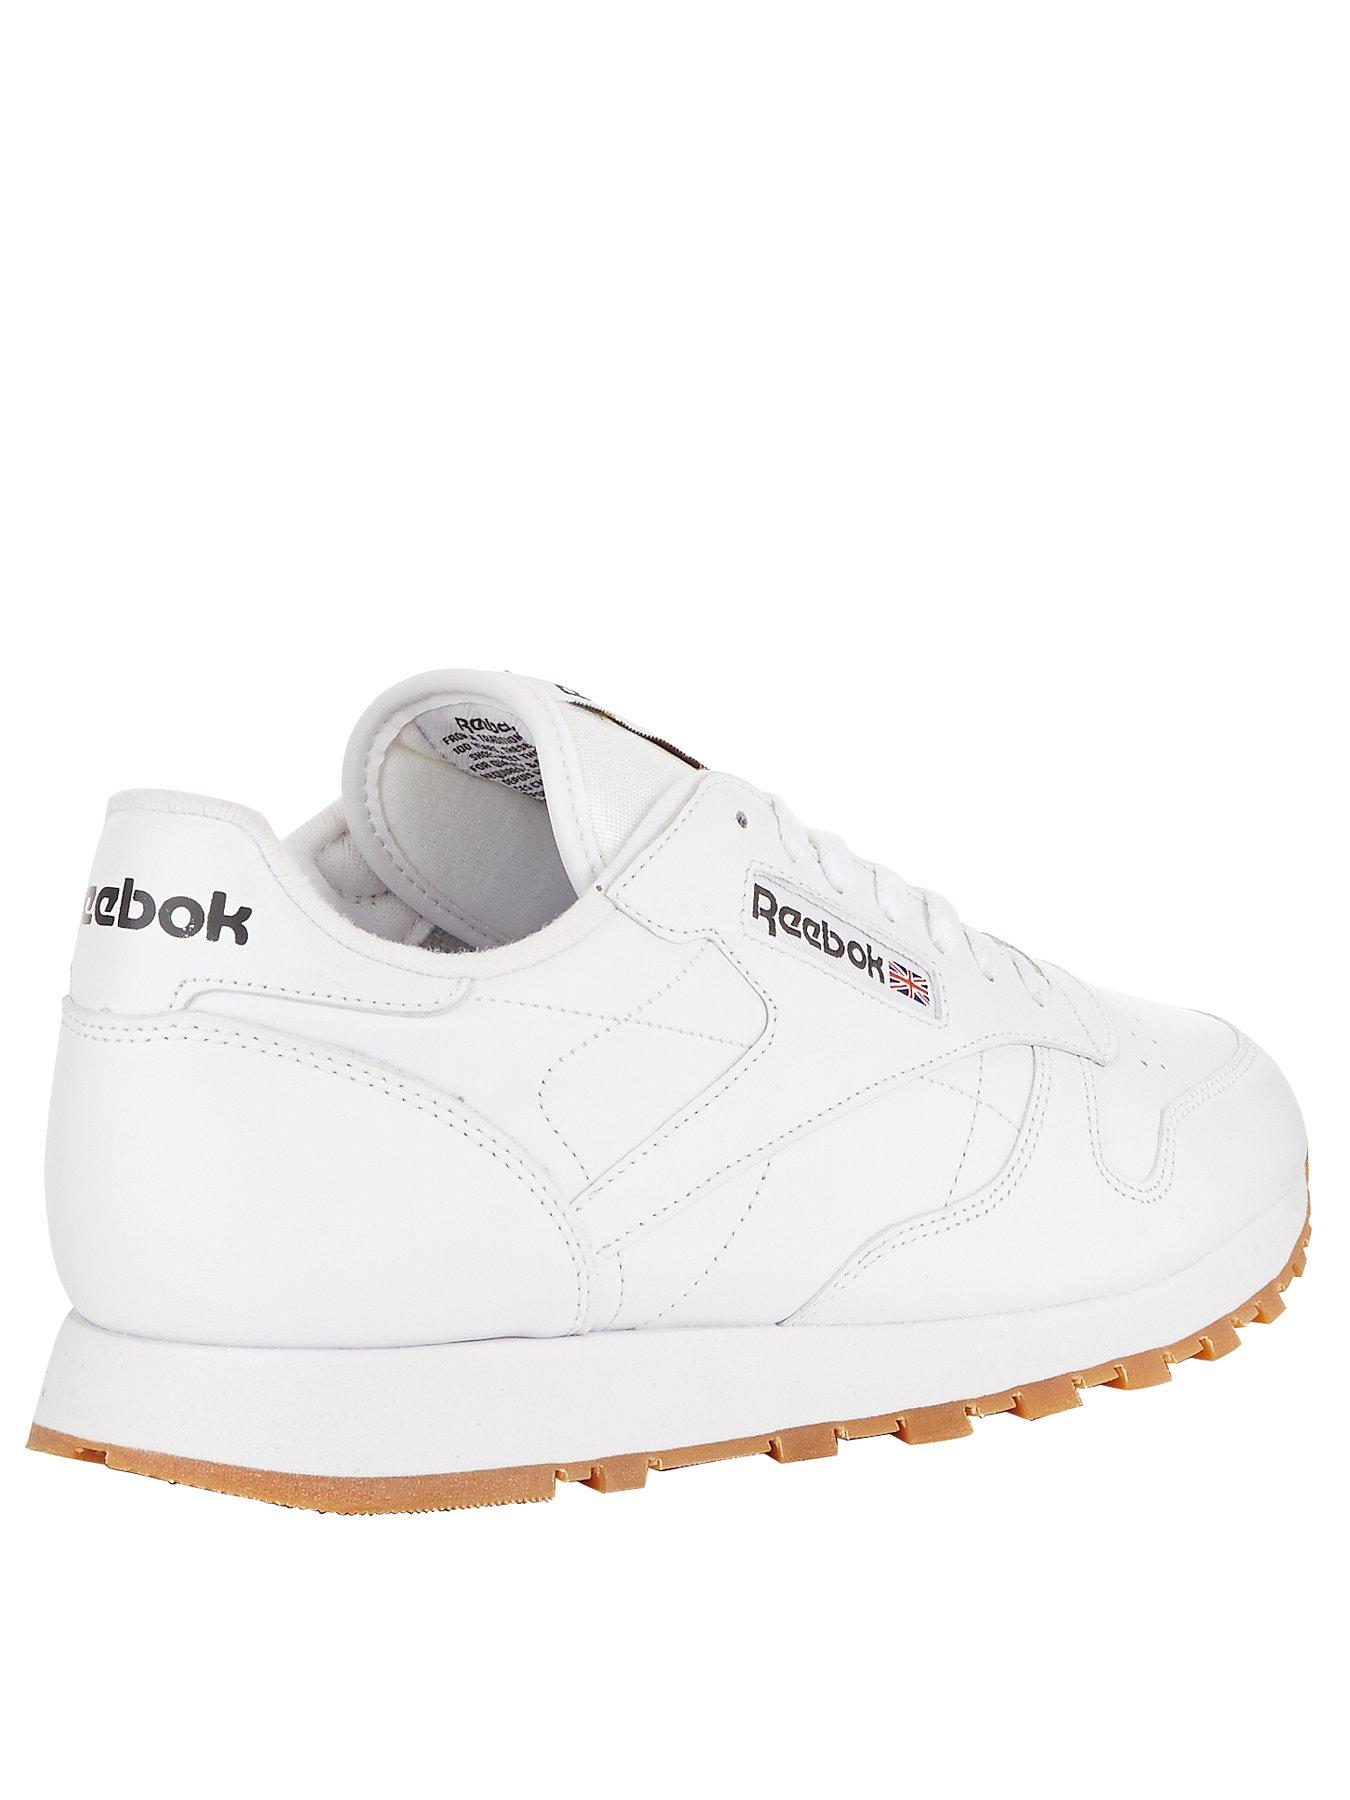 Reebok Classic Leather Mens Trainers 